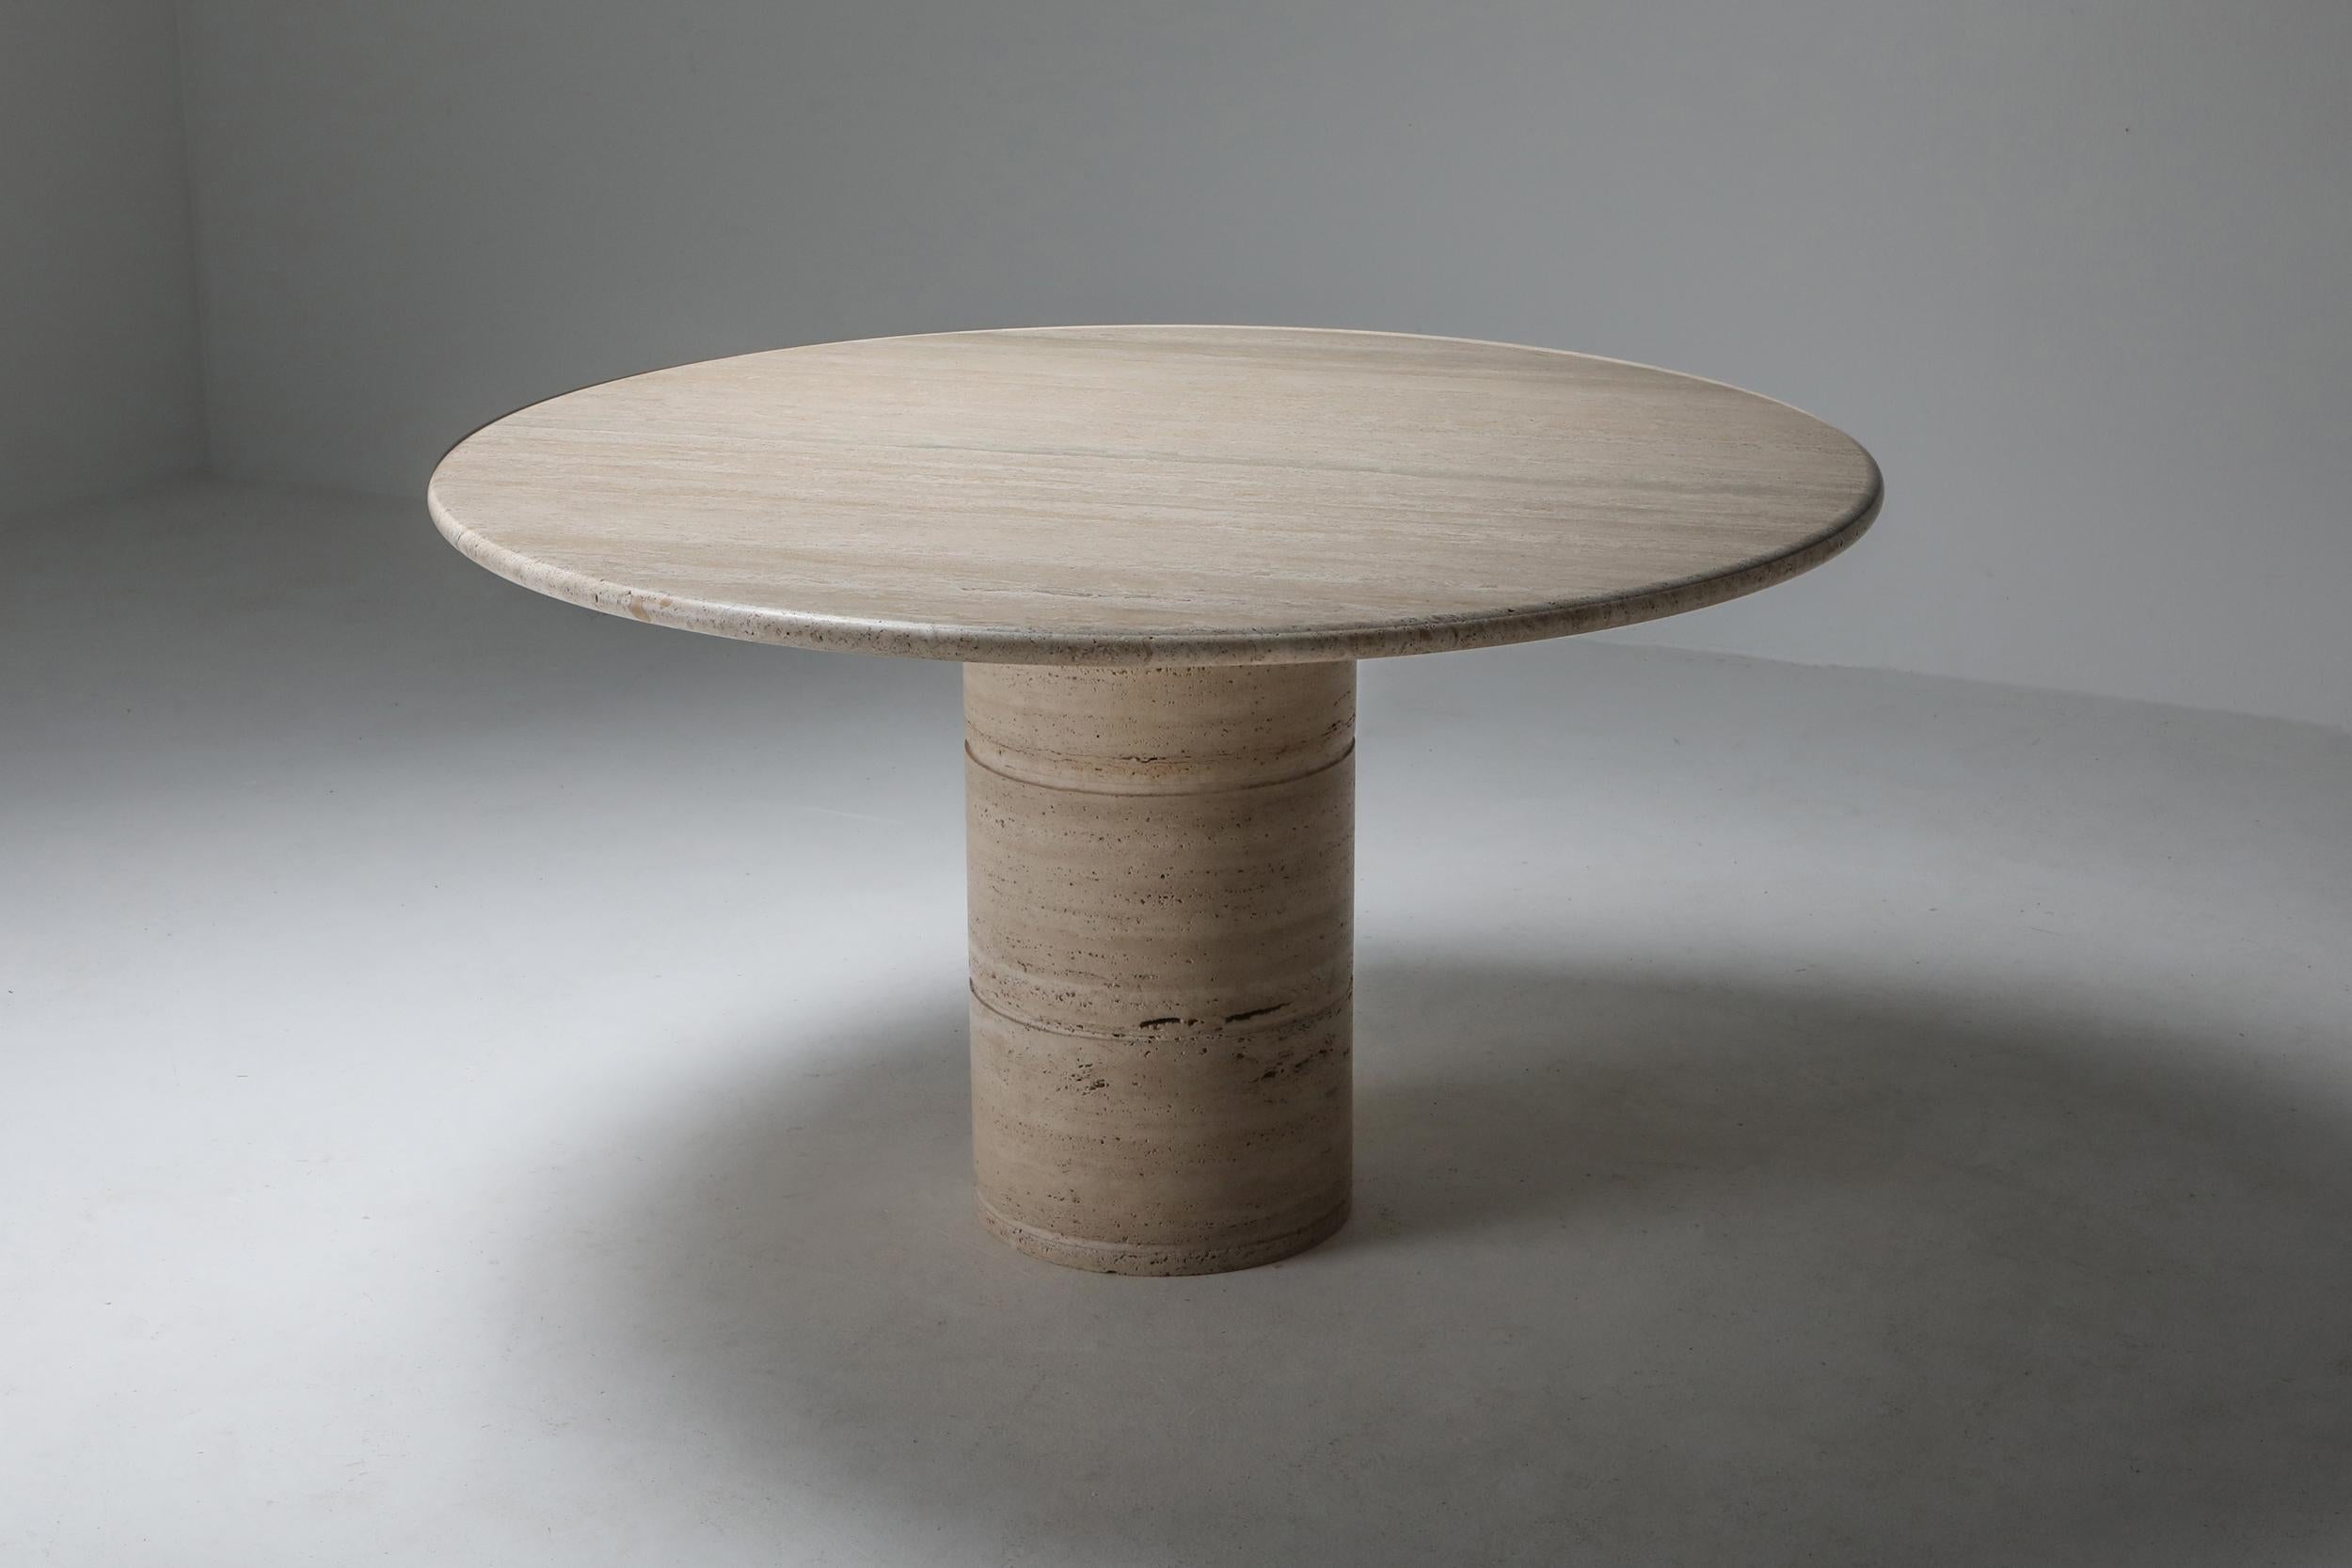 Skipper, Angelo Mangiarotti, travertine, Italy, 1970s.
Nude travertine dining table with a round edged top mounted on a cylindrical column base consisting of three parts. Simple Postmodern design with a very natural feel to it.

 